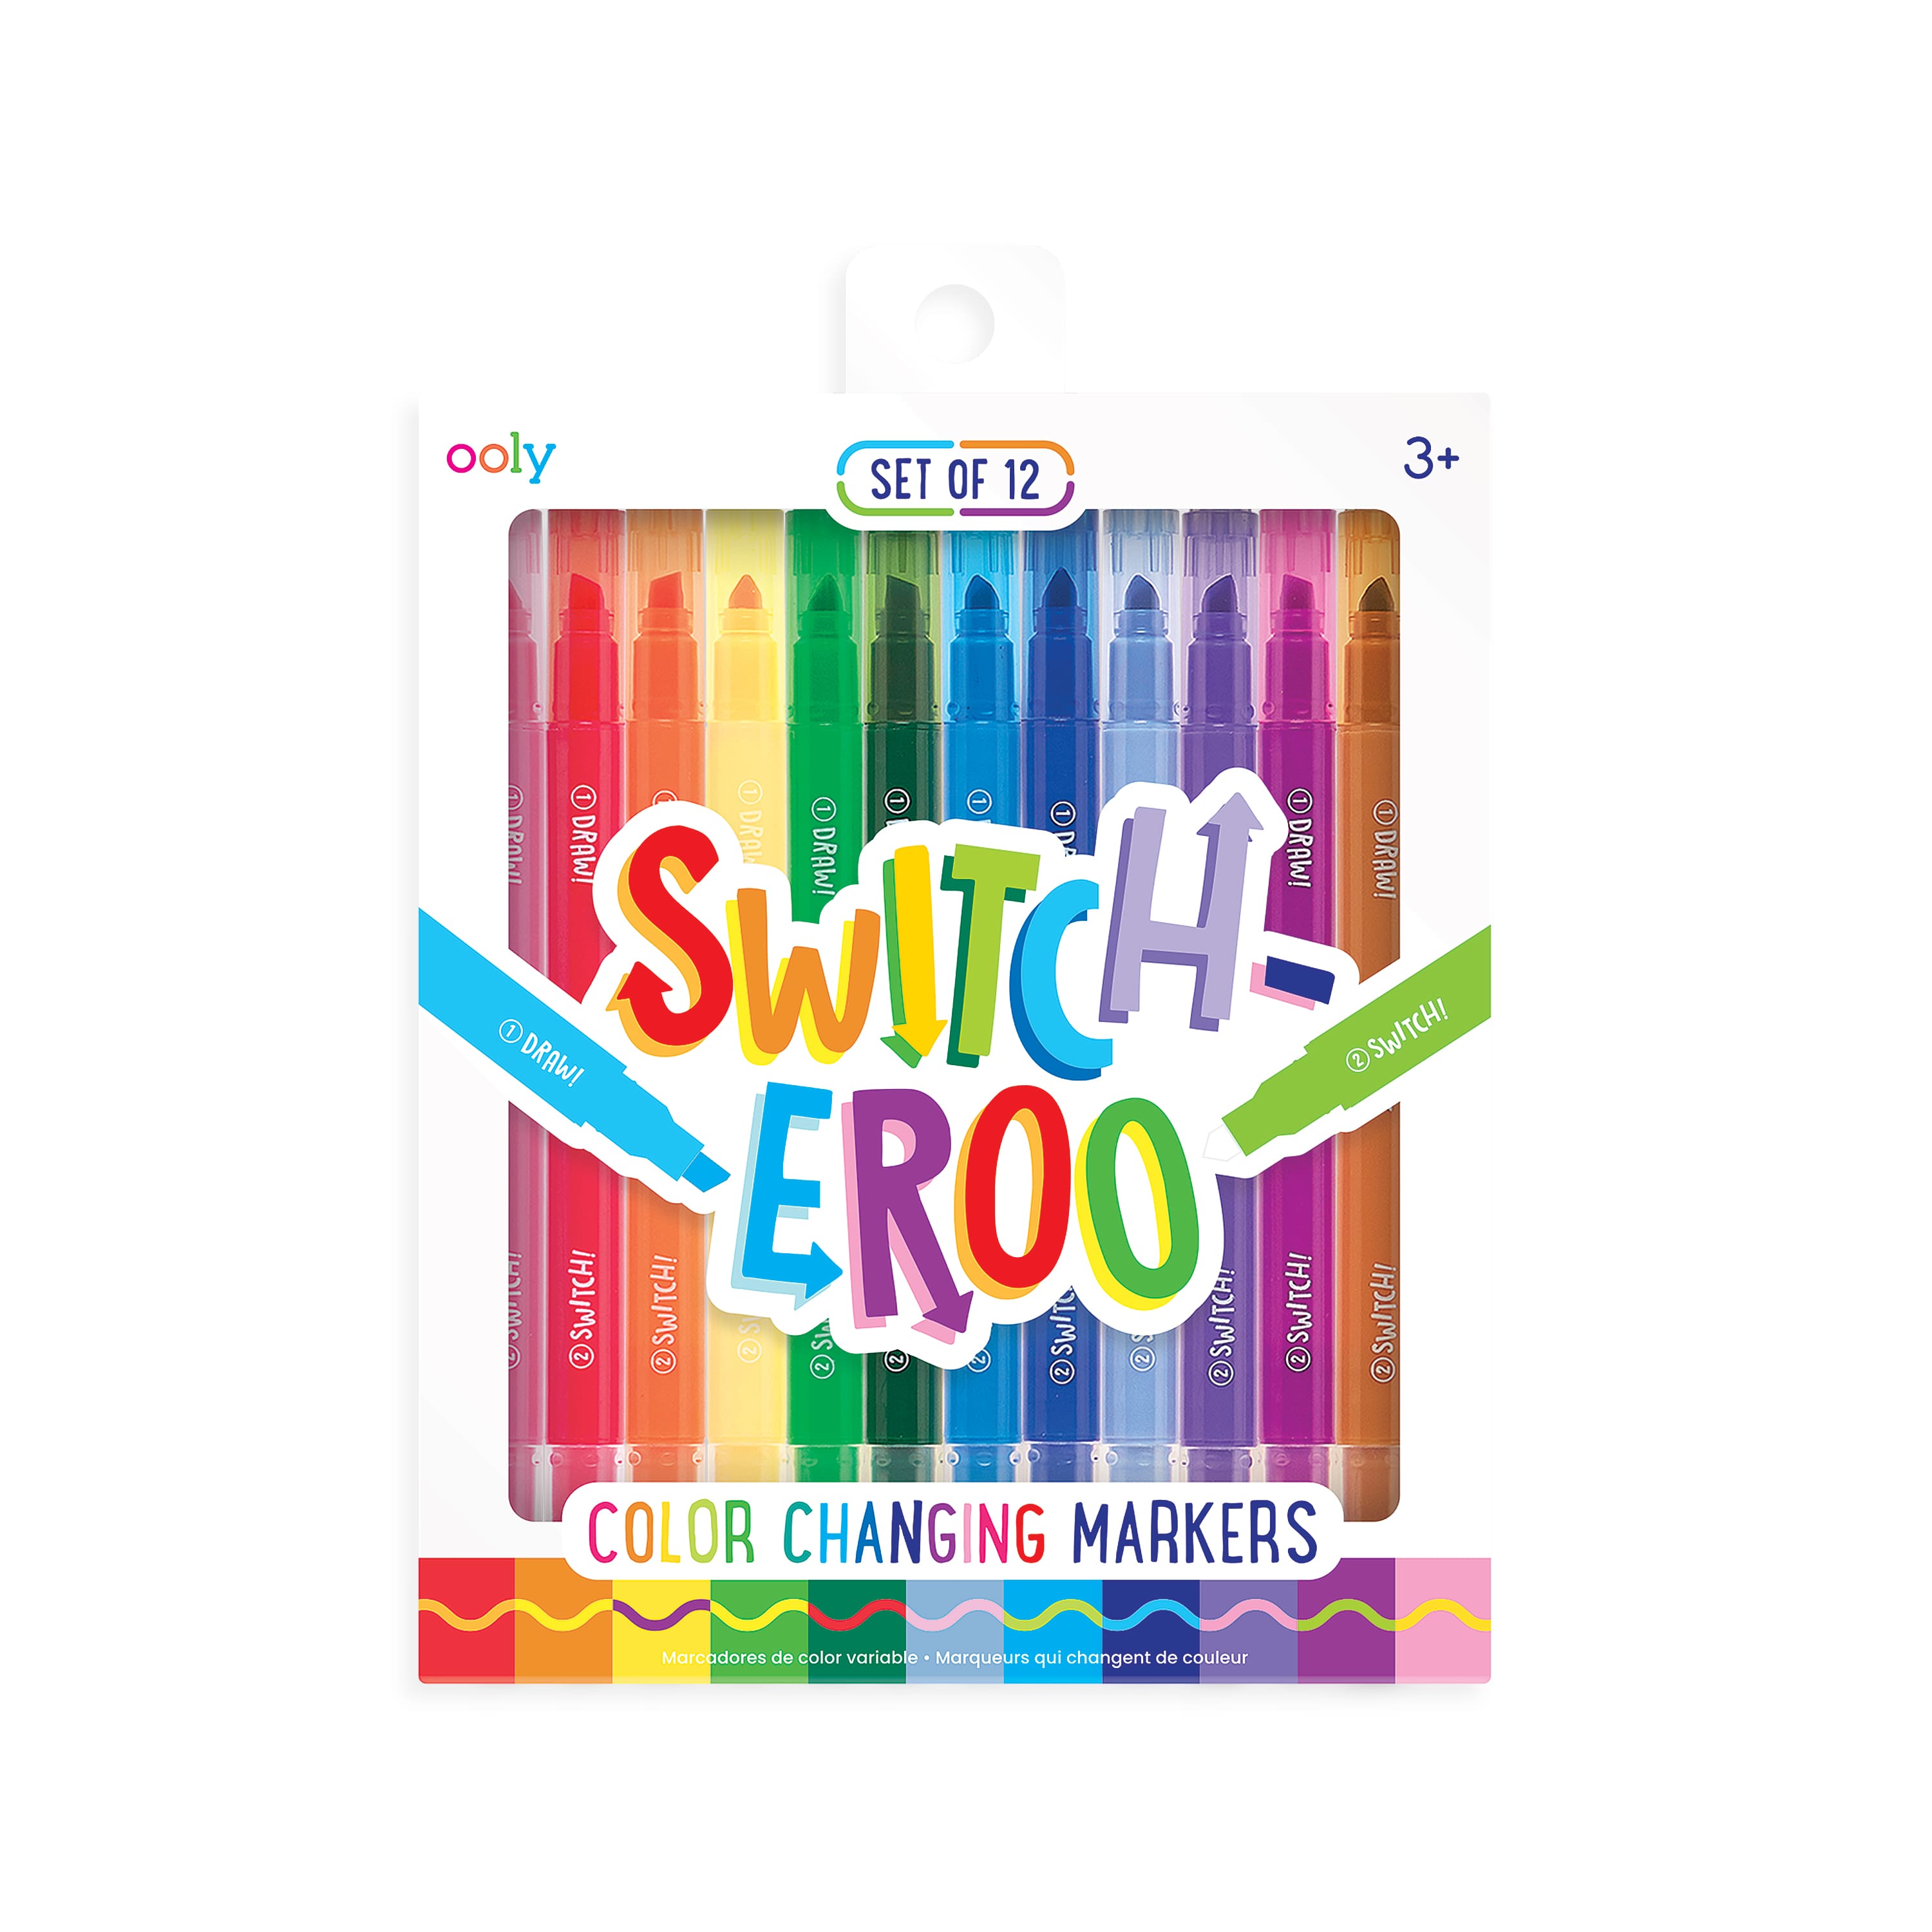 16 Packs: 50 ct. (800 total) Round Tip Washable Markers by Creatology®